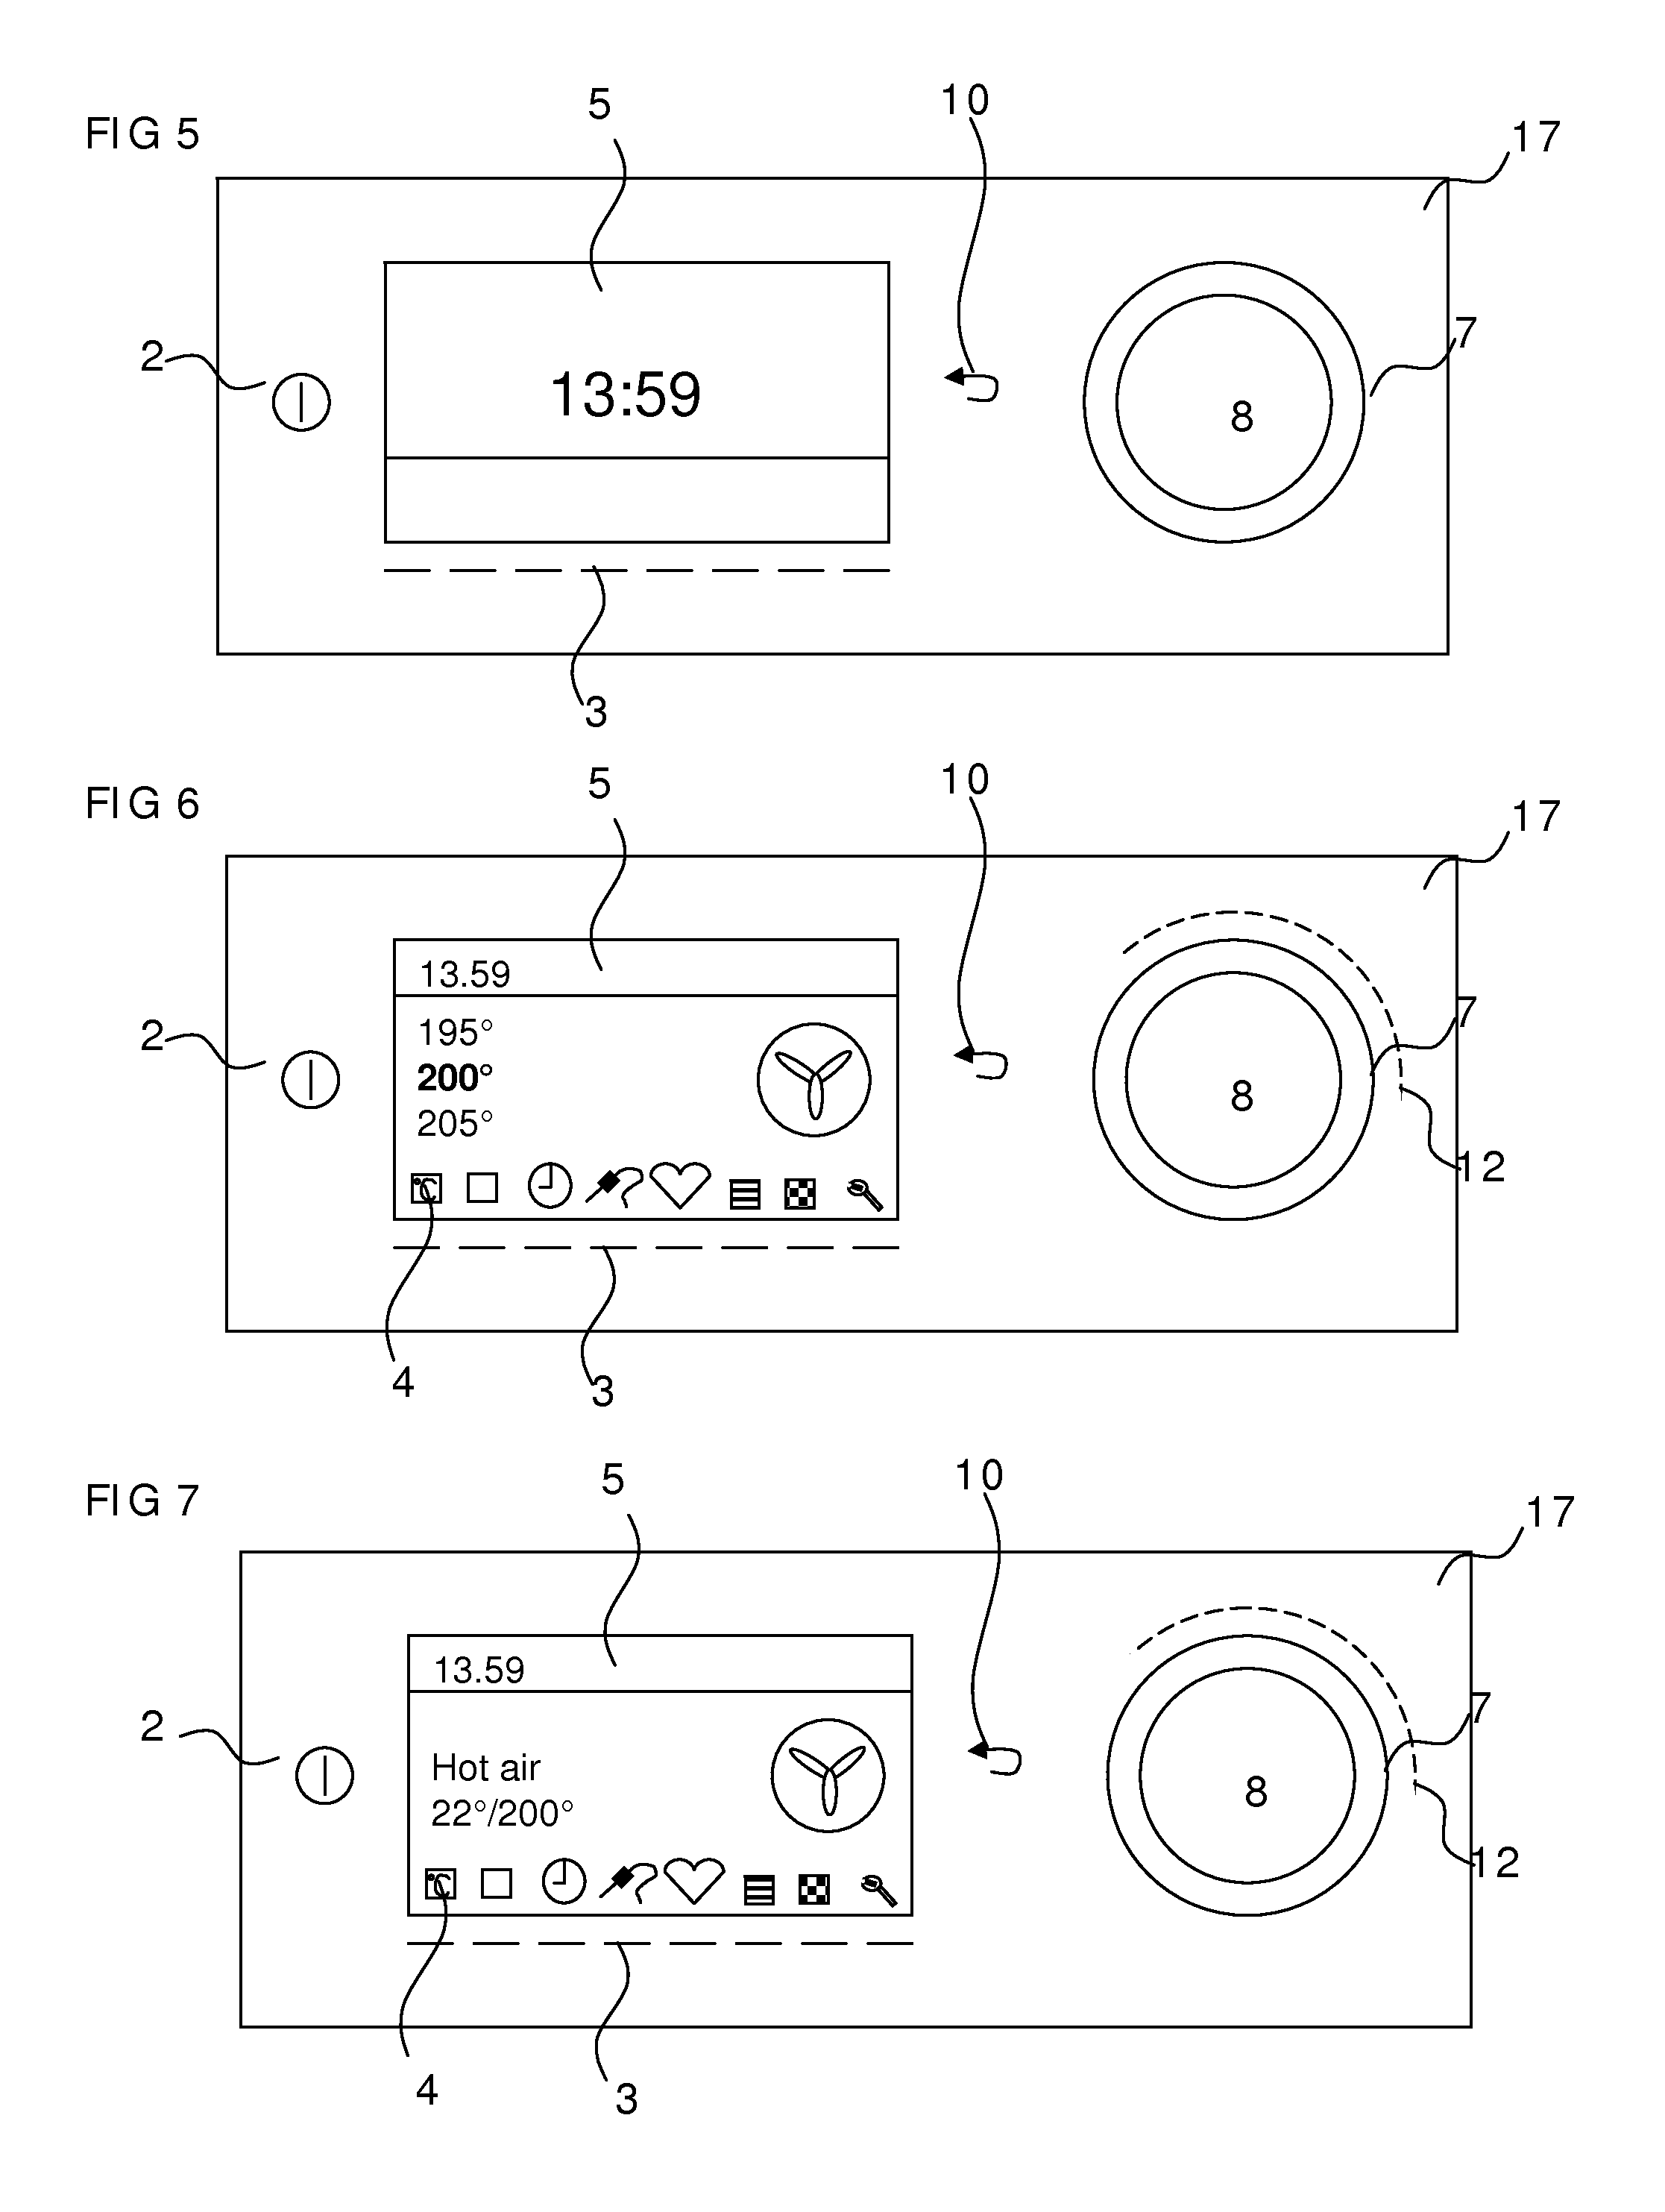 Control interface for household appliances